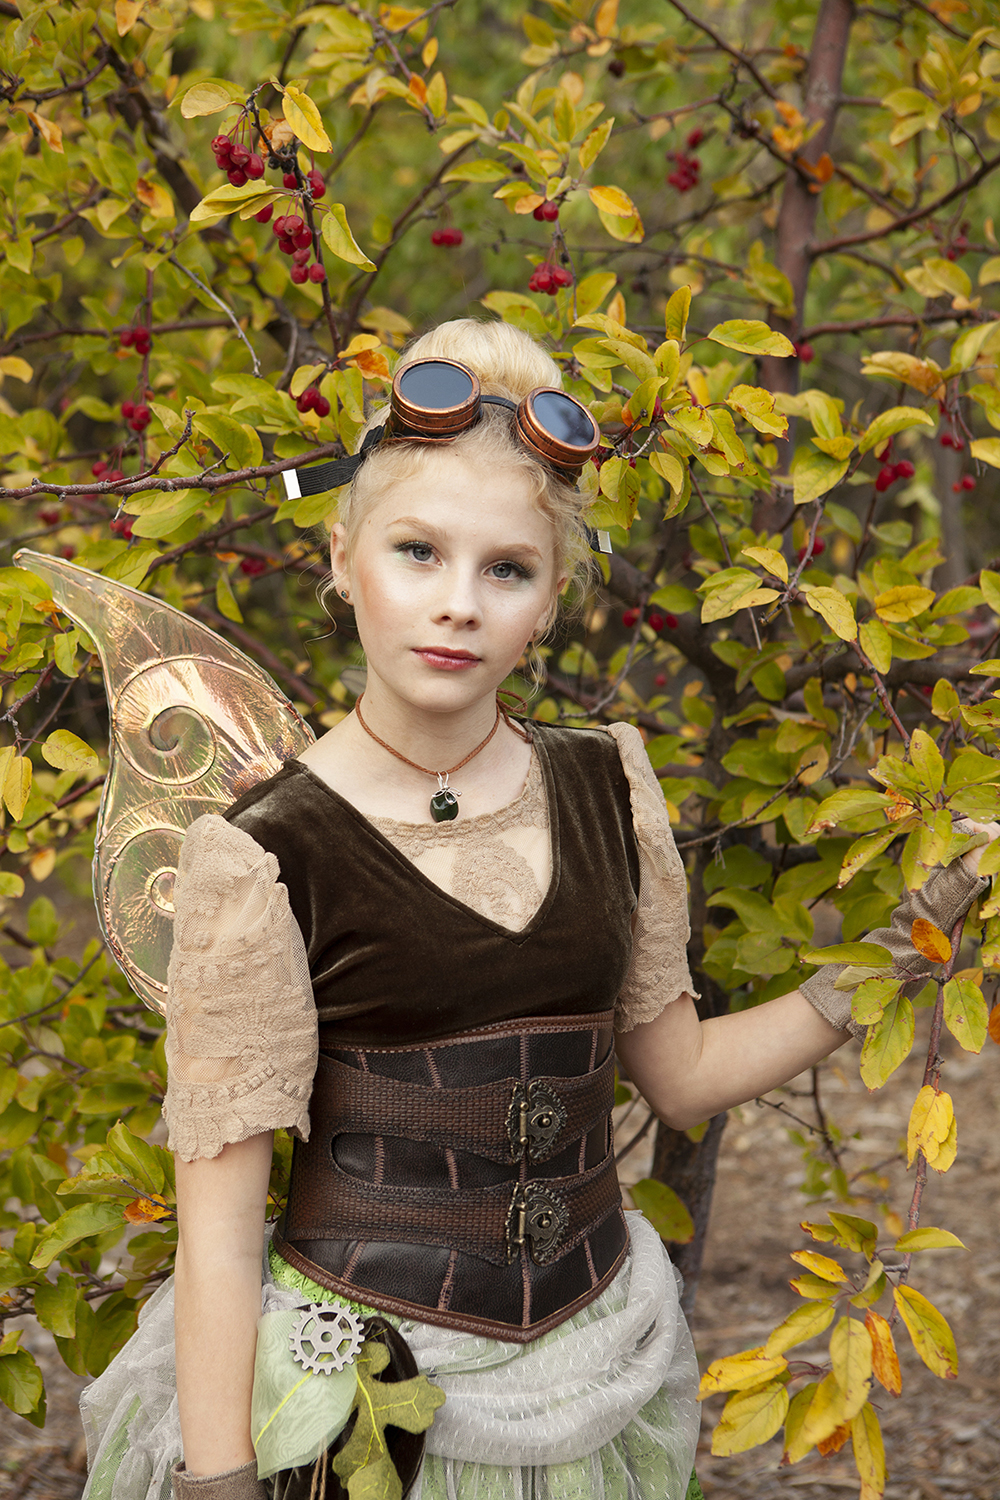 Coolest Ever Homemade Tinkerbell Steampunk Costume